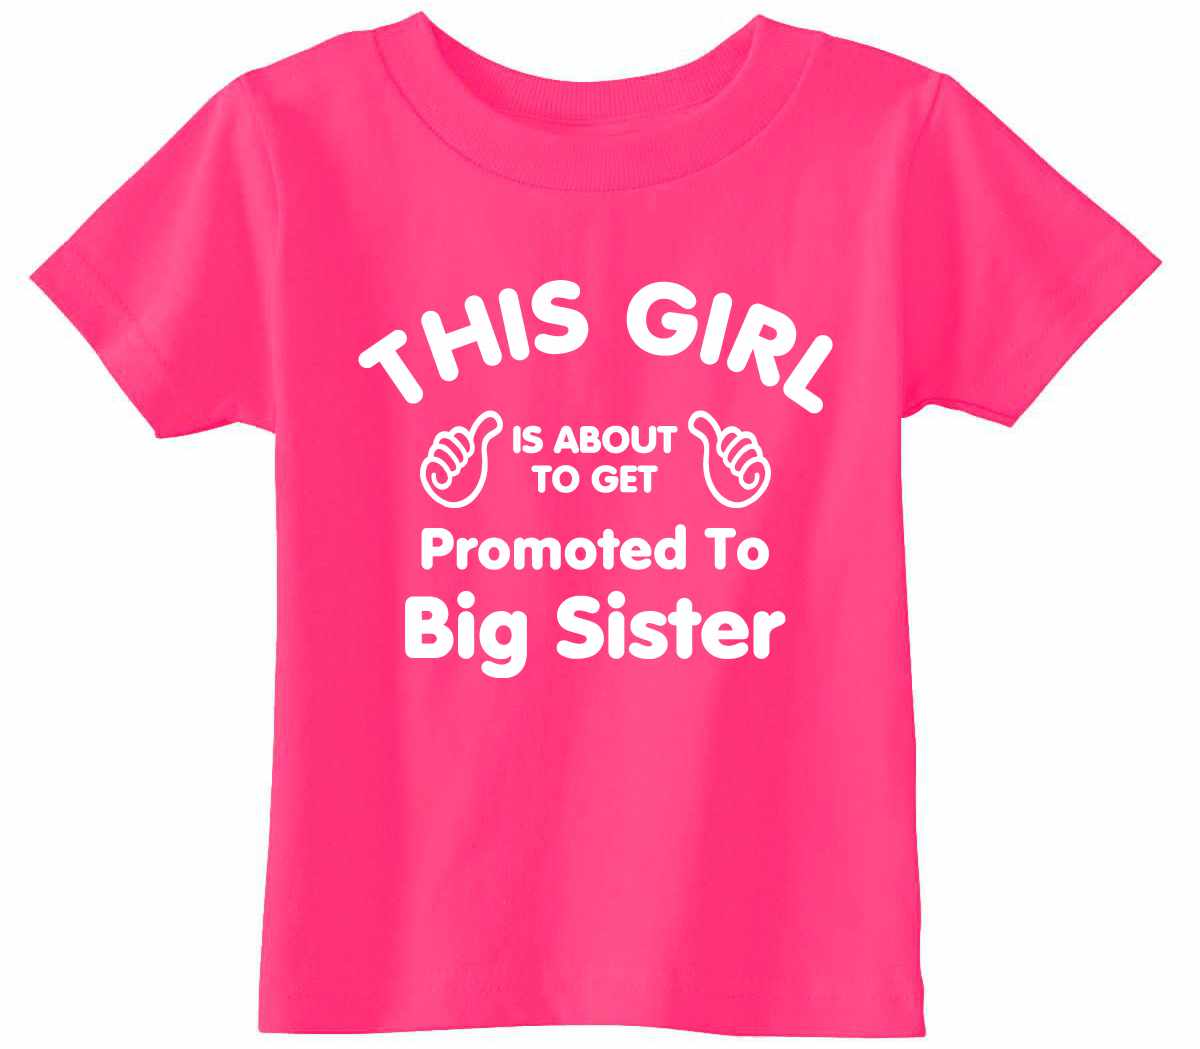 This Girl is About To Get Promoted To Big Sister Infant/Toddler  (#1082-7)